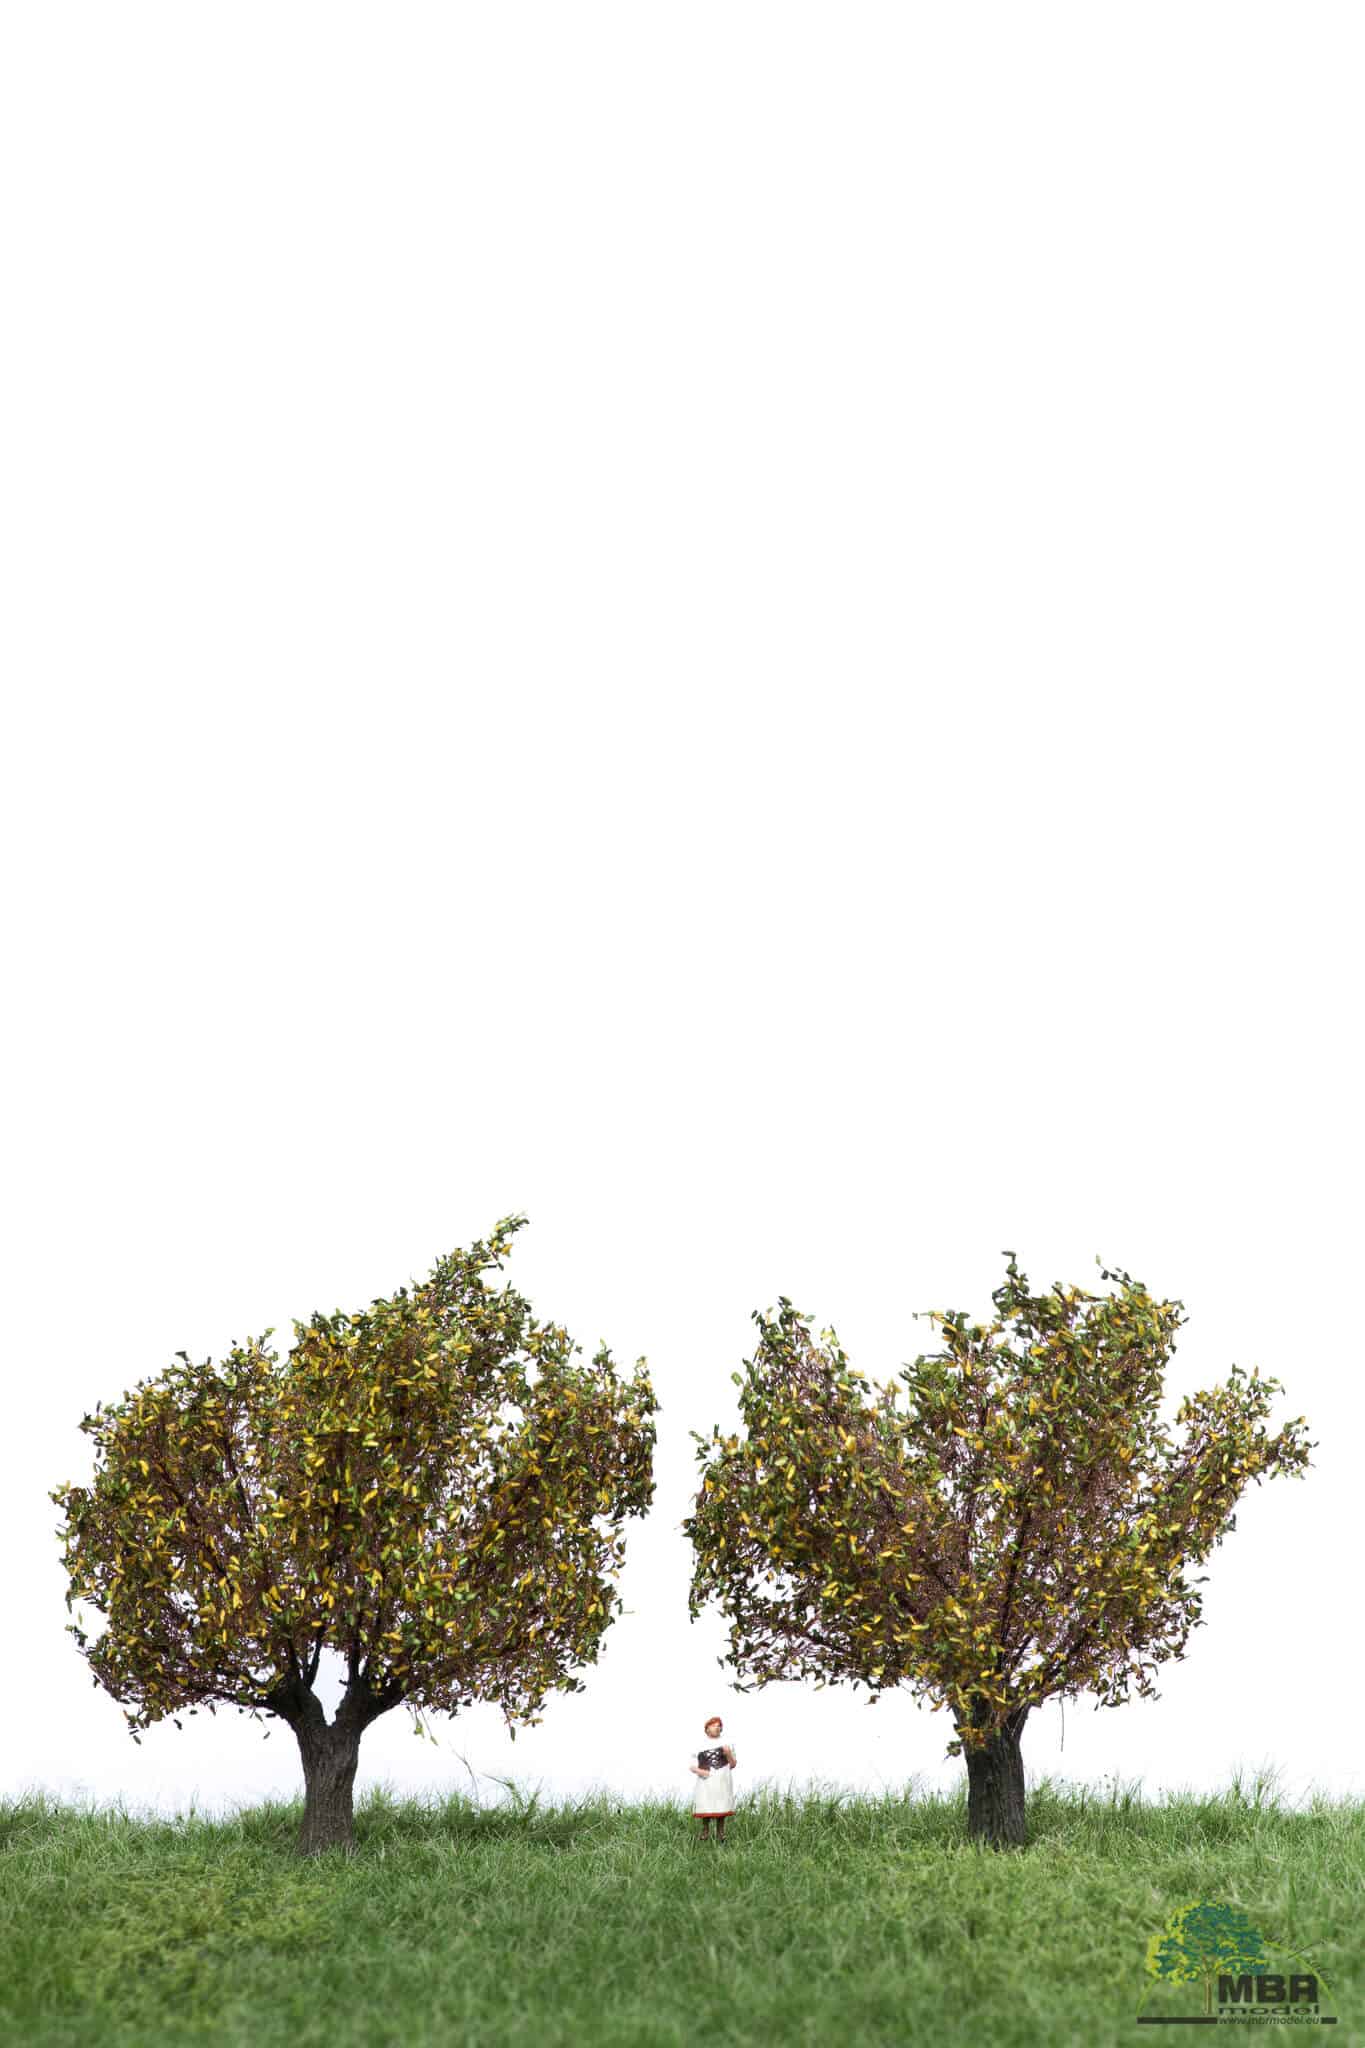 MBR WILLOW TREE - VARIOUS SEASONS